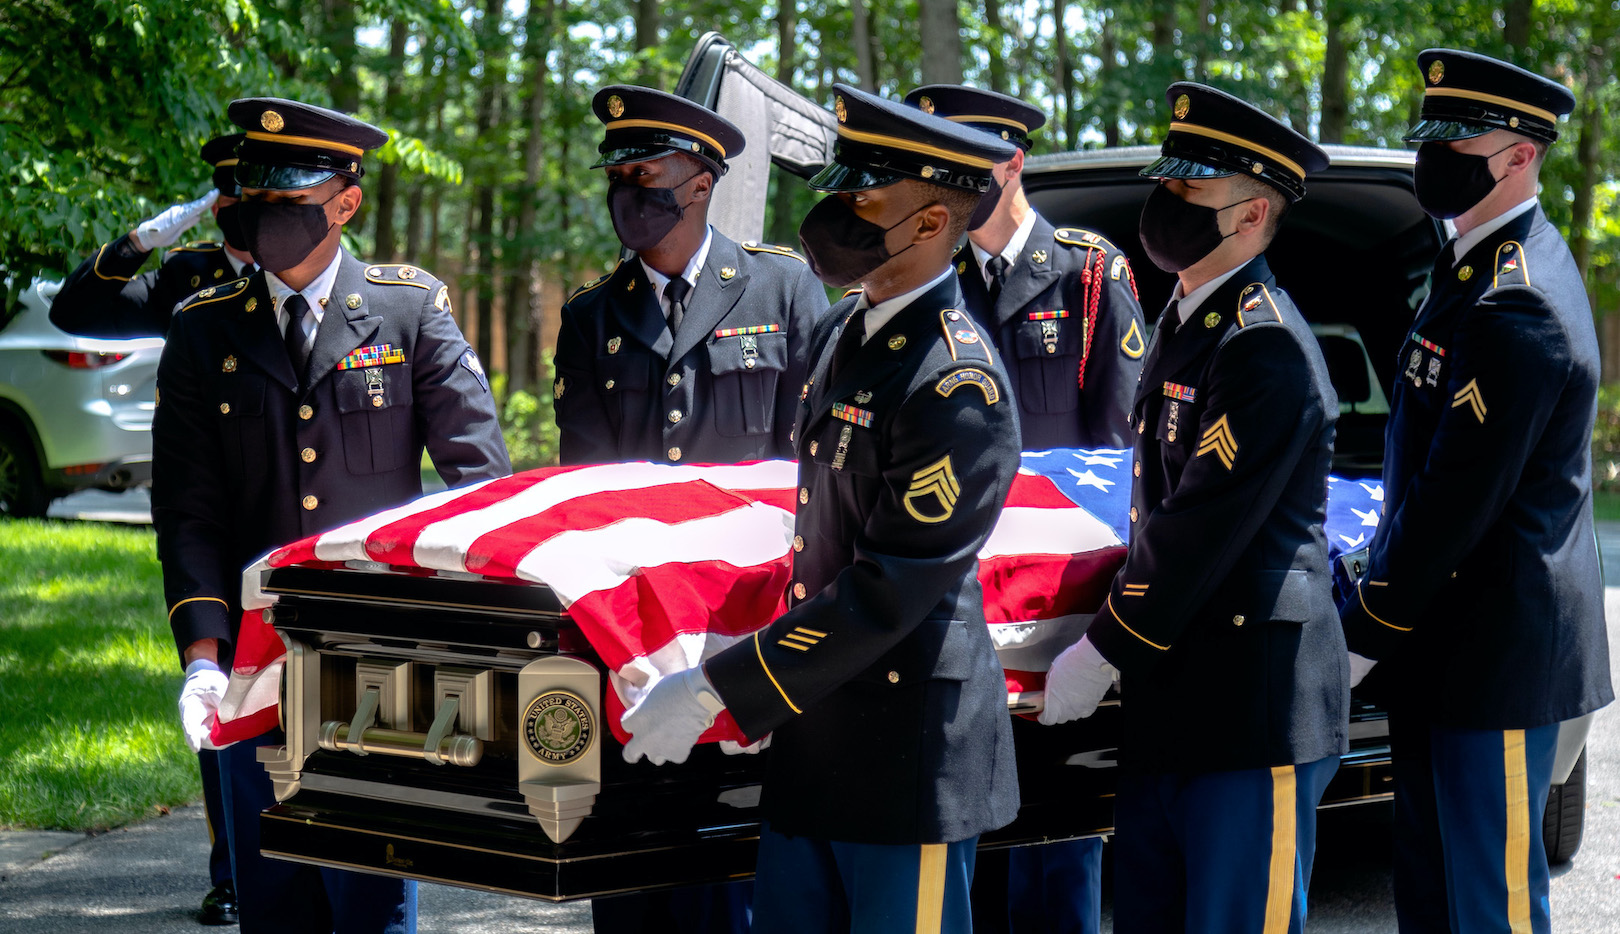 New York Army National Guard honor guard soldiers provide honors during a funeral for Sgt. 1st Class Henry Colon on July 7 at Calverton National Cemetery on Long Island. (Photo by Sgt. Jordan Sivayavirojna/courtesy of readMedia)